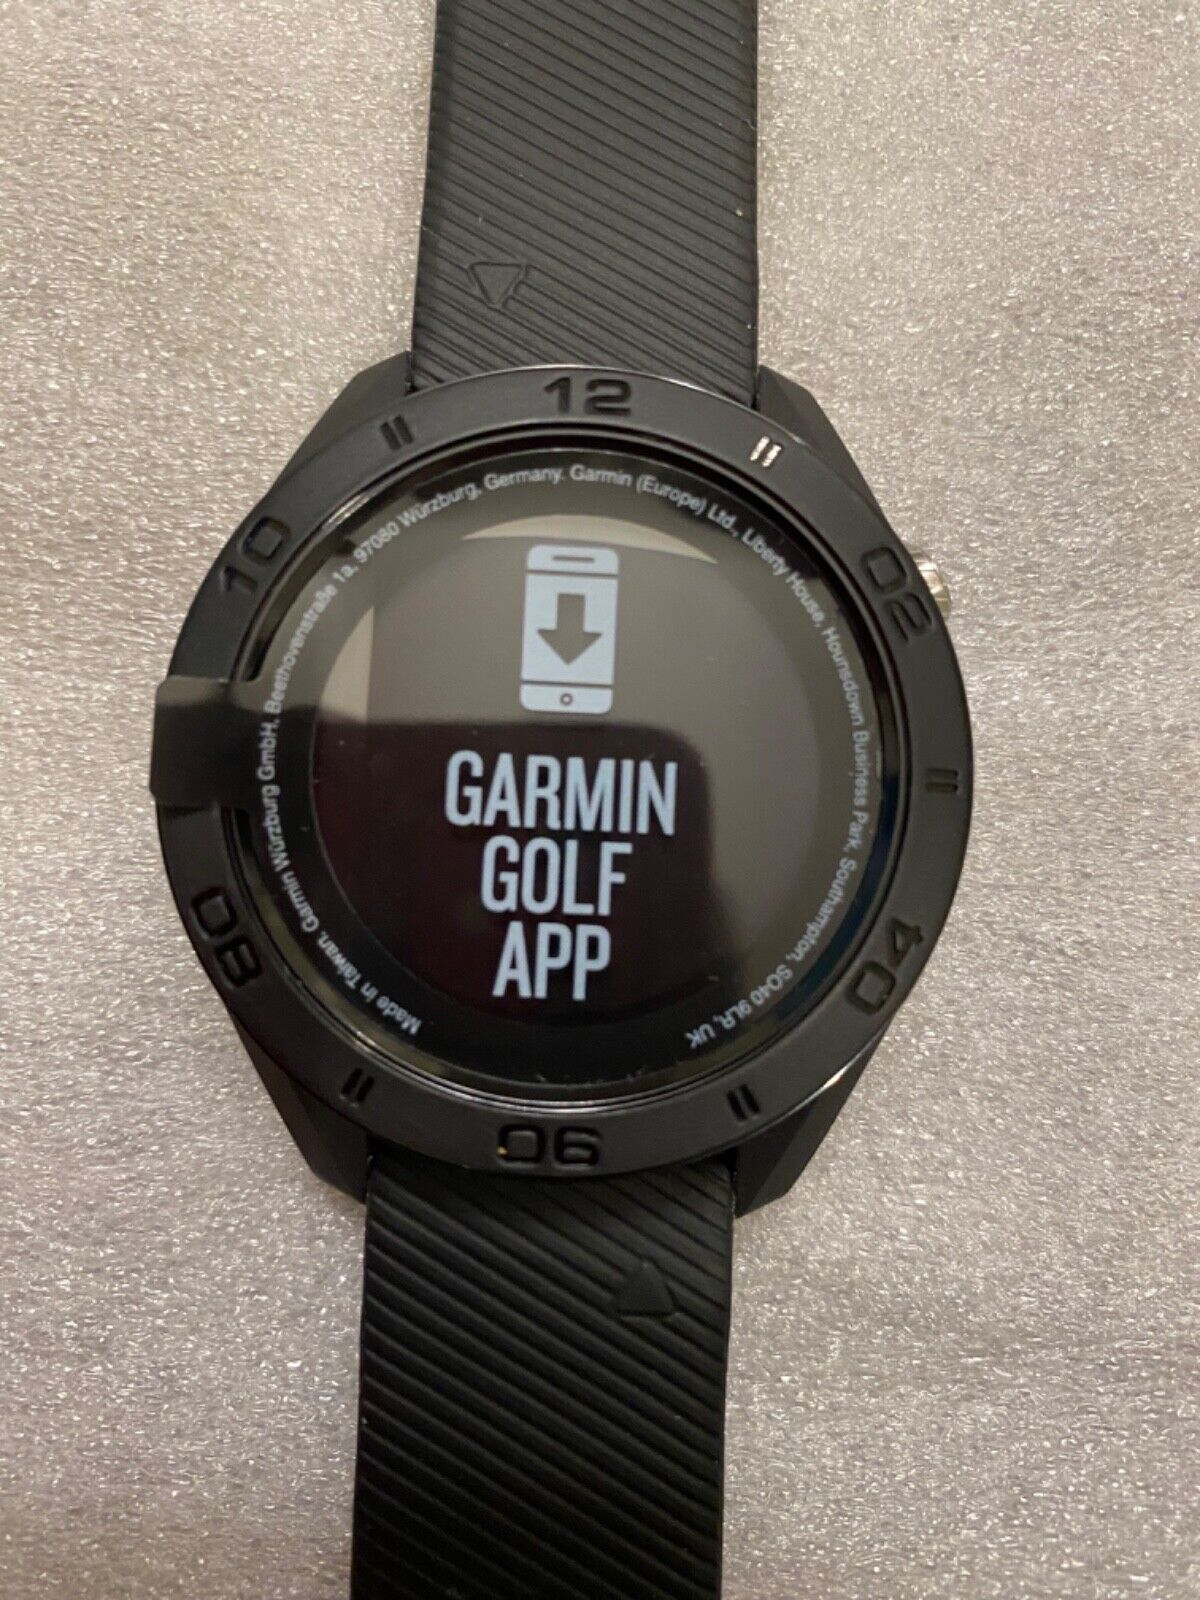 Garmin s60 premium gps golf watch with touchscreen display with extra straps